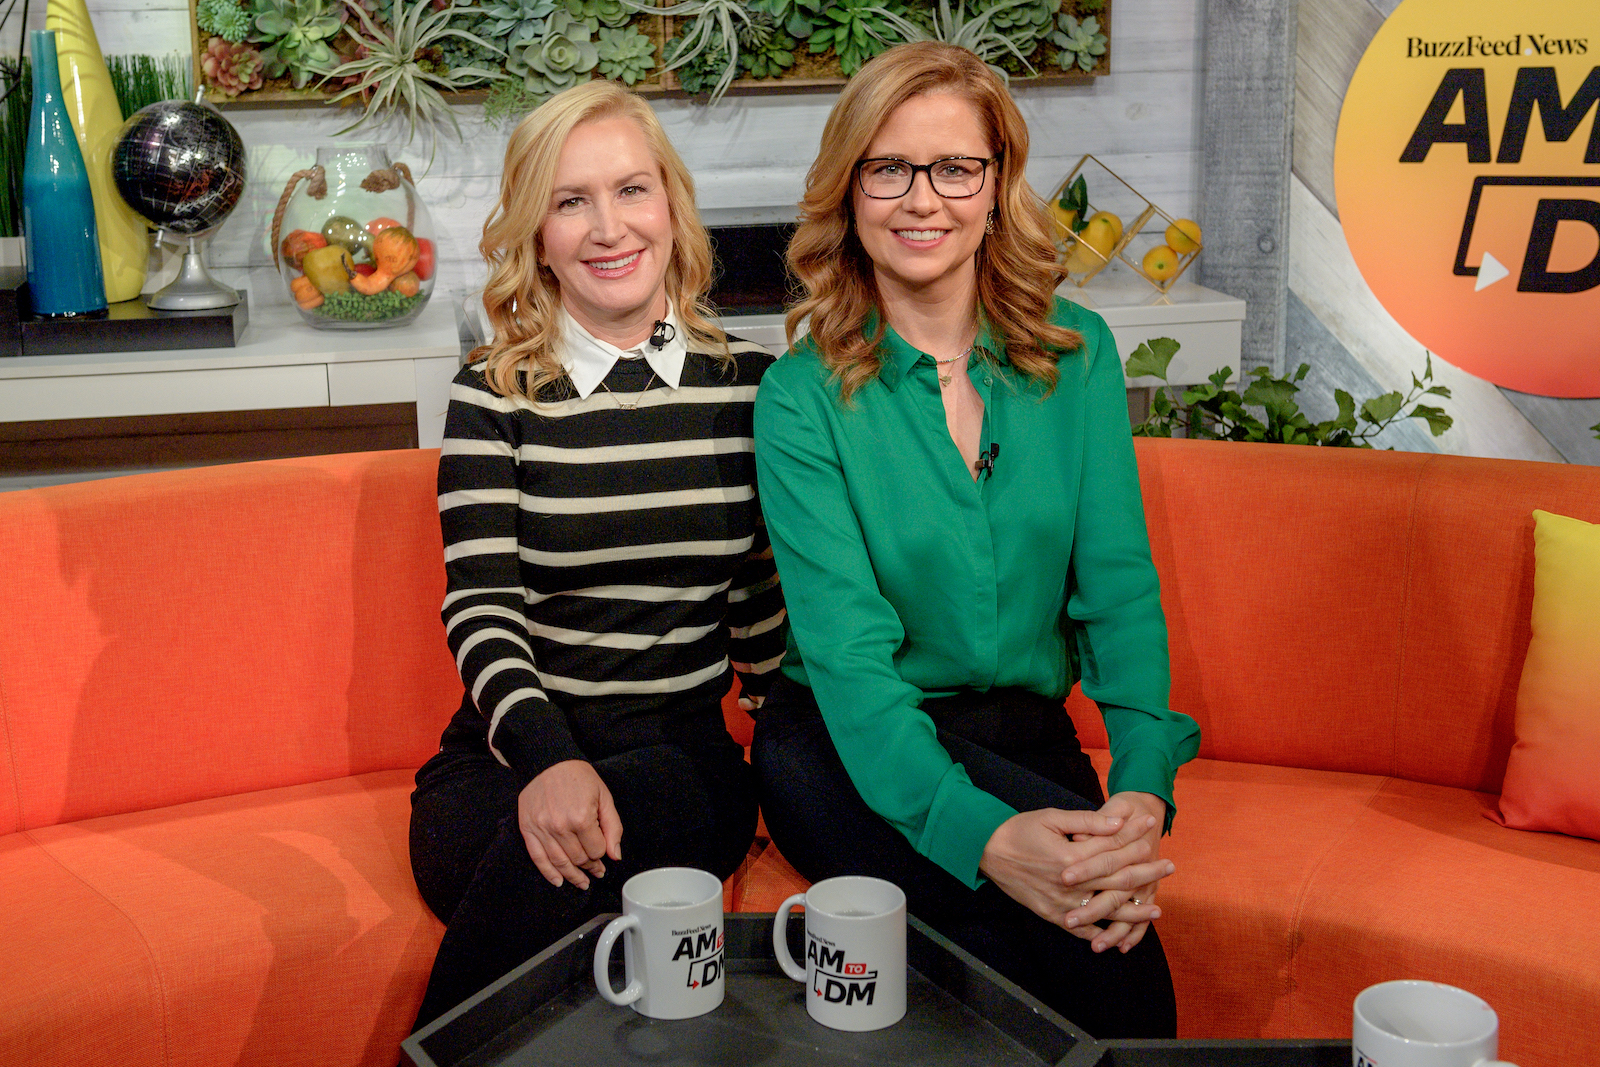 Angela Kinsey and Jenna Fischer from 'The Office' smile for a photo during a live talk show appearance 